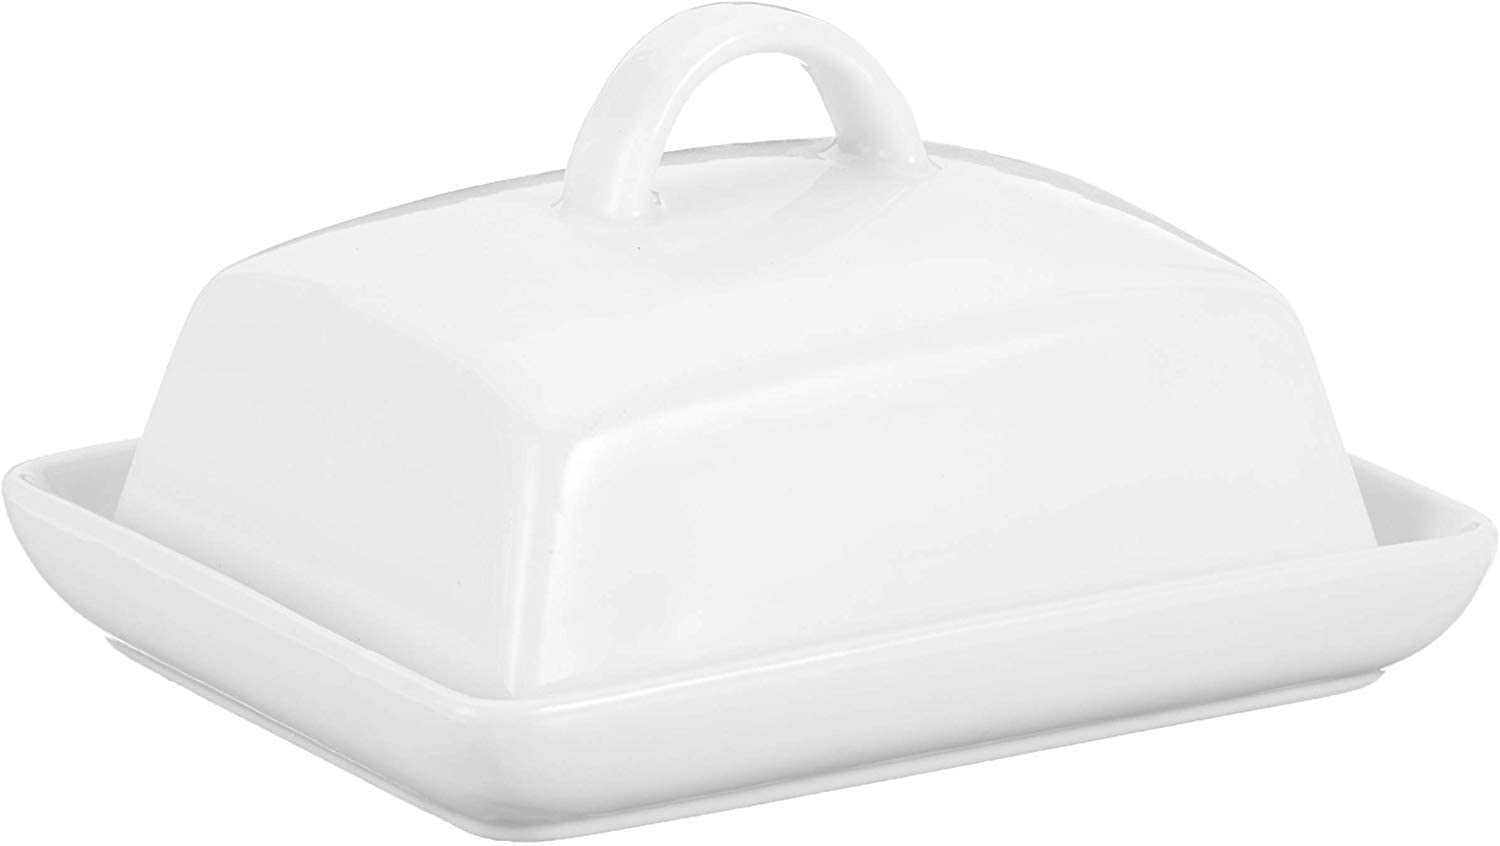 Ingenio von Tefal axentia butter dish porcelain, classic butter bell for 250 g butter, butter box for household and kitchen, butter dish with lid and handle, white, 16 x 8 x 13 cm